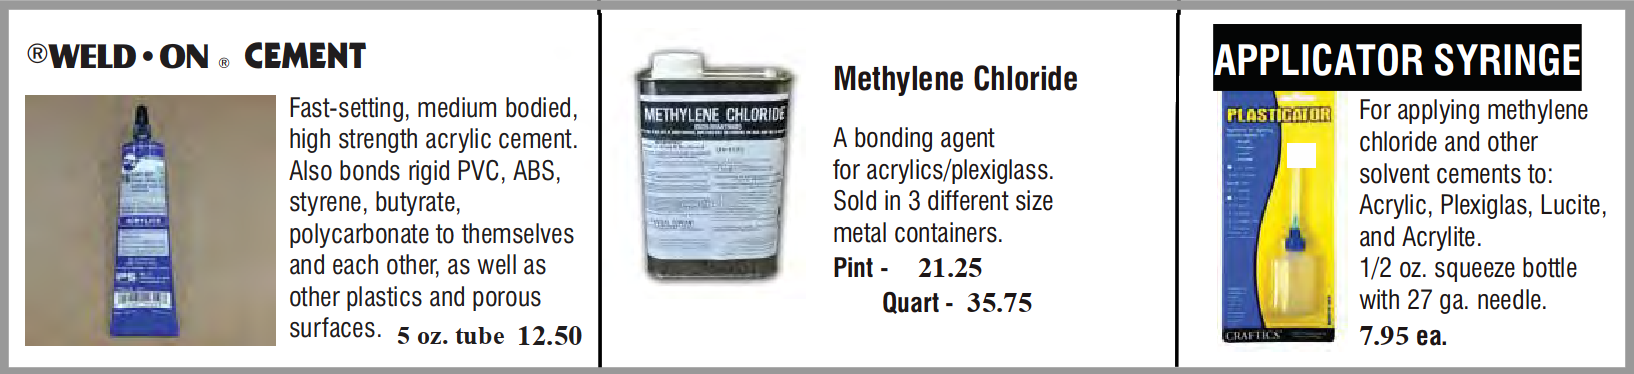 adhesives apr 22 1 - Adhesives - Spray, Cement, Tape